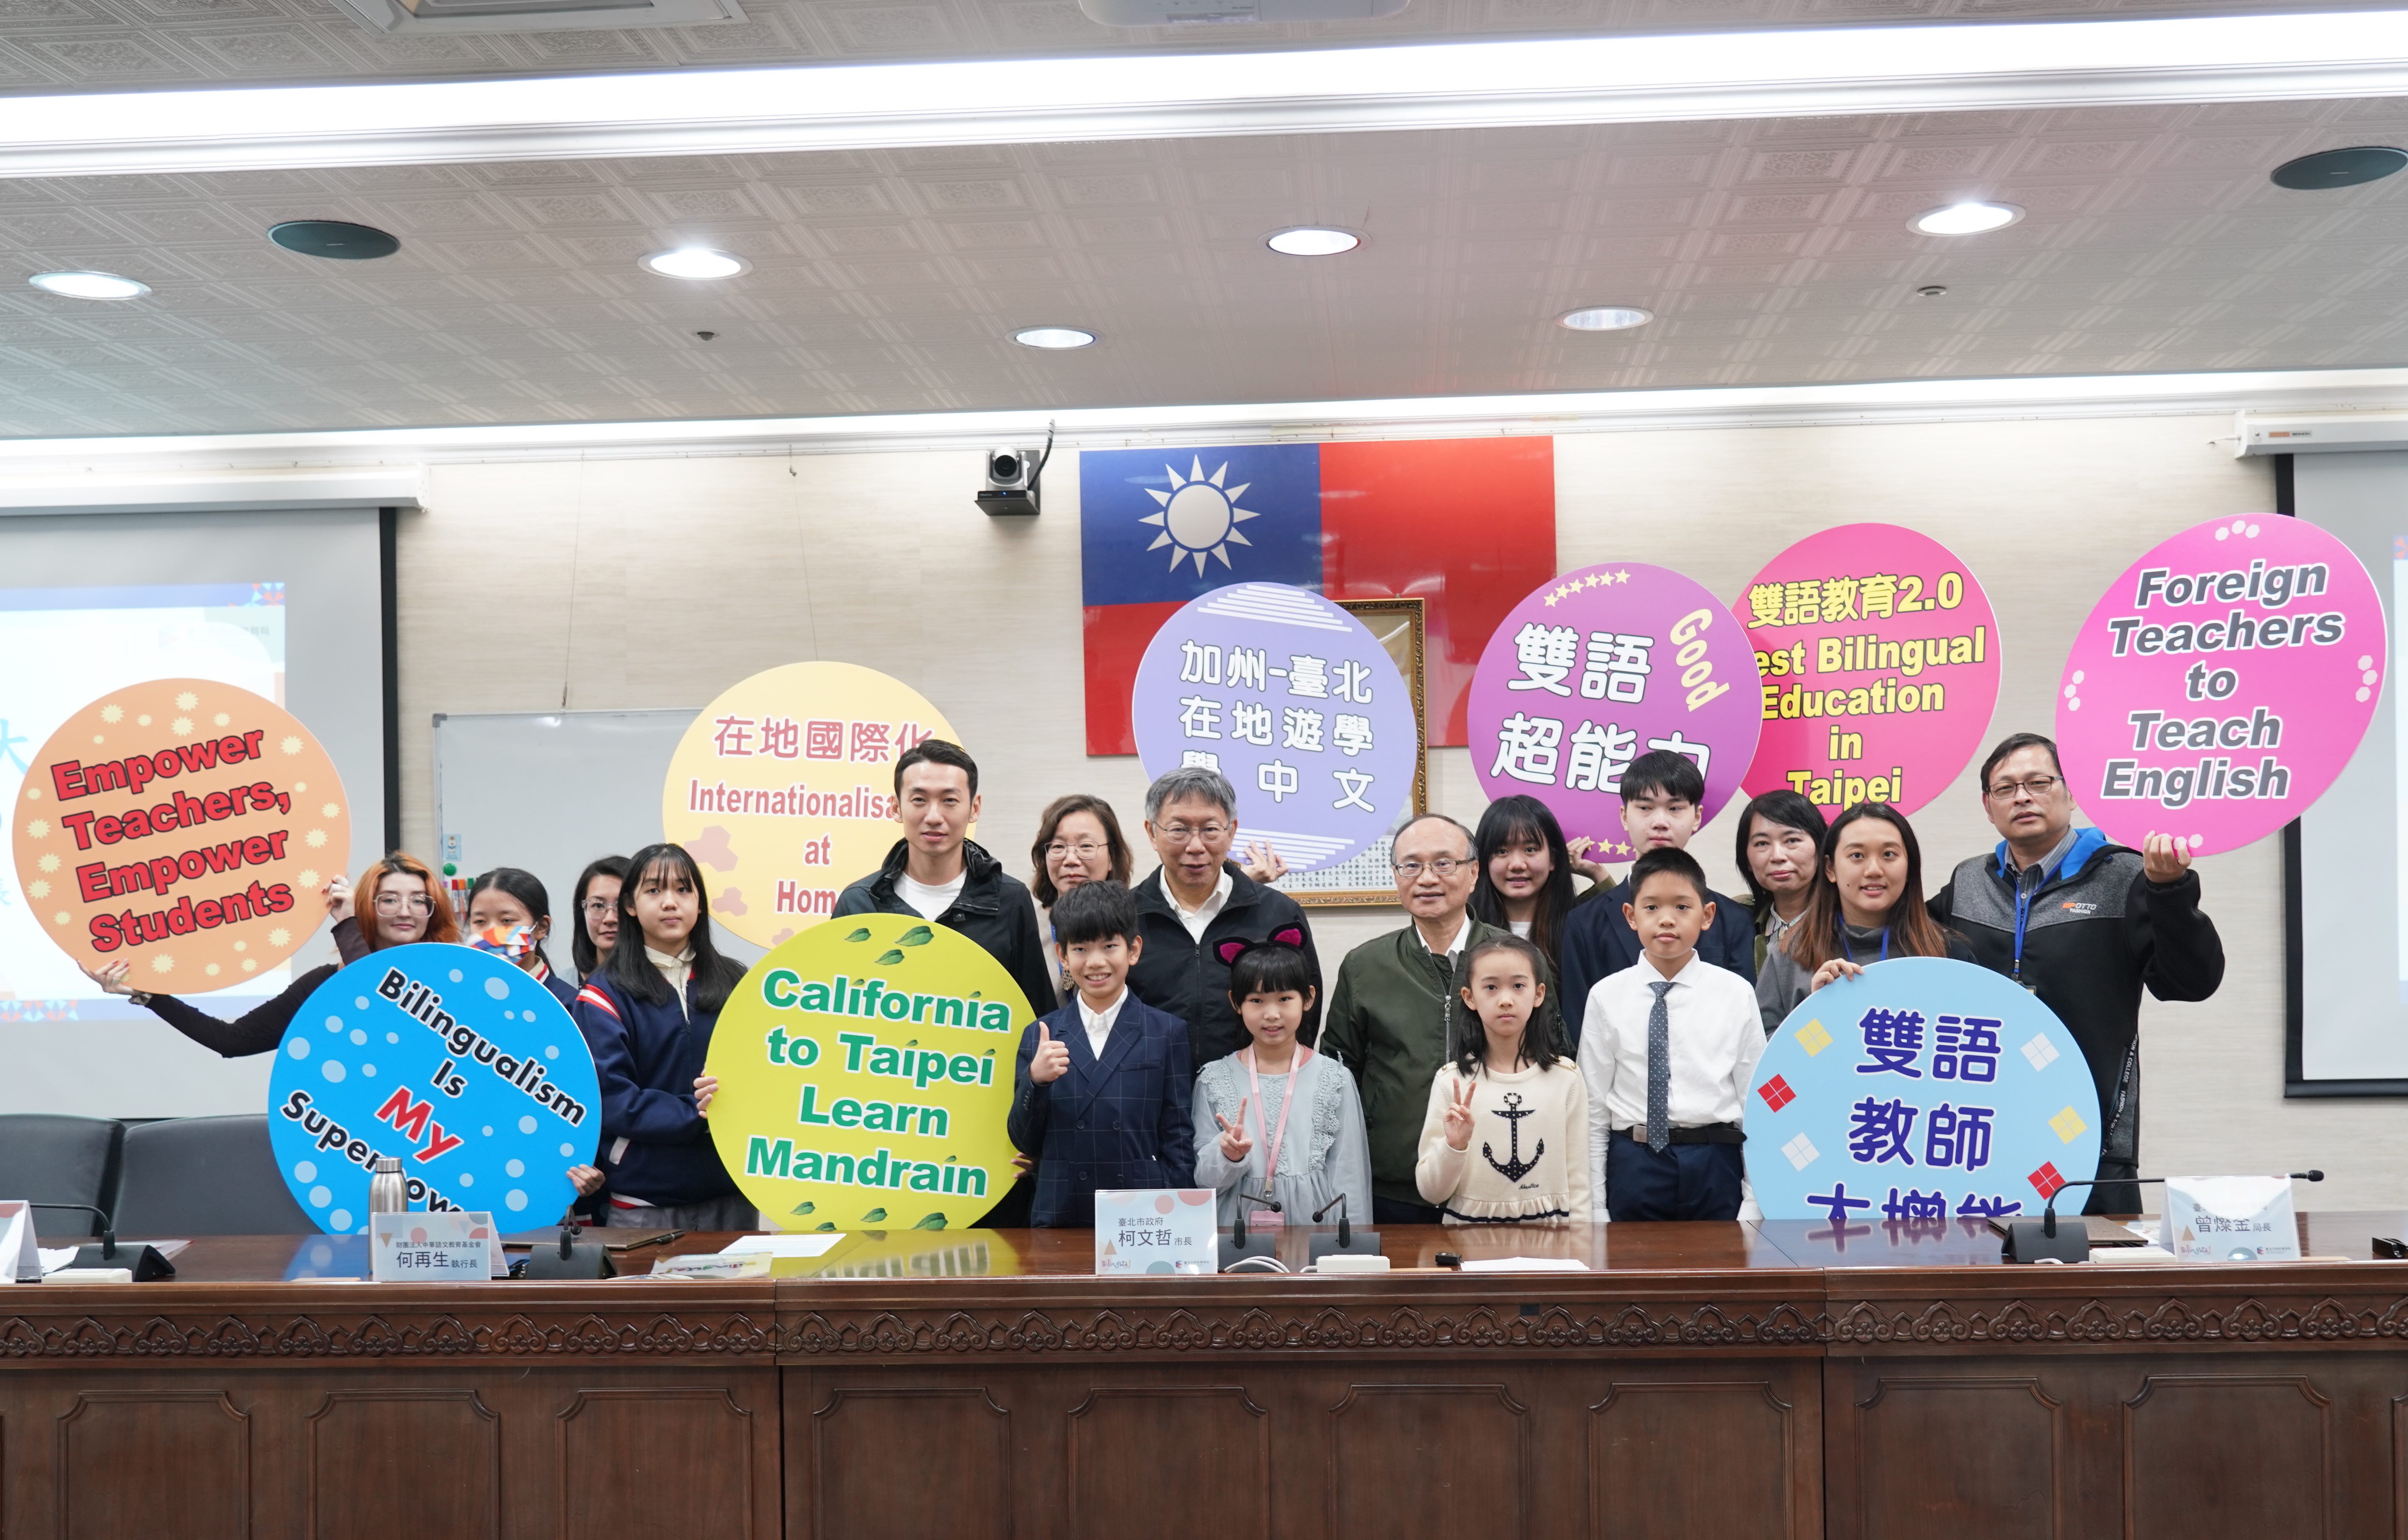 DOE signs a MOU with TLI Foundation to strengthen Taipei’s bilingual education program